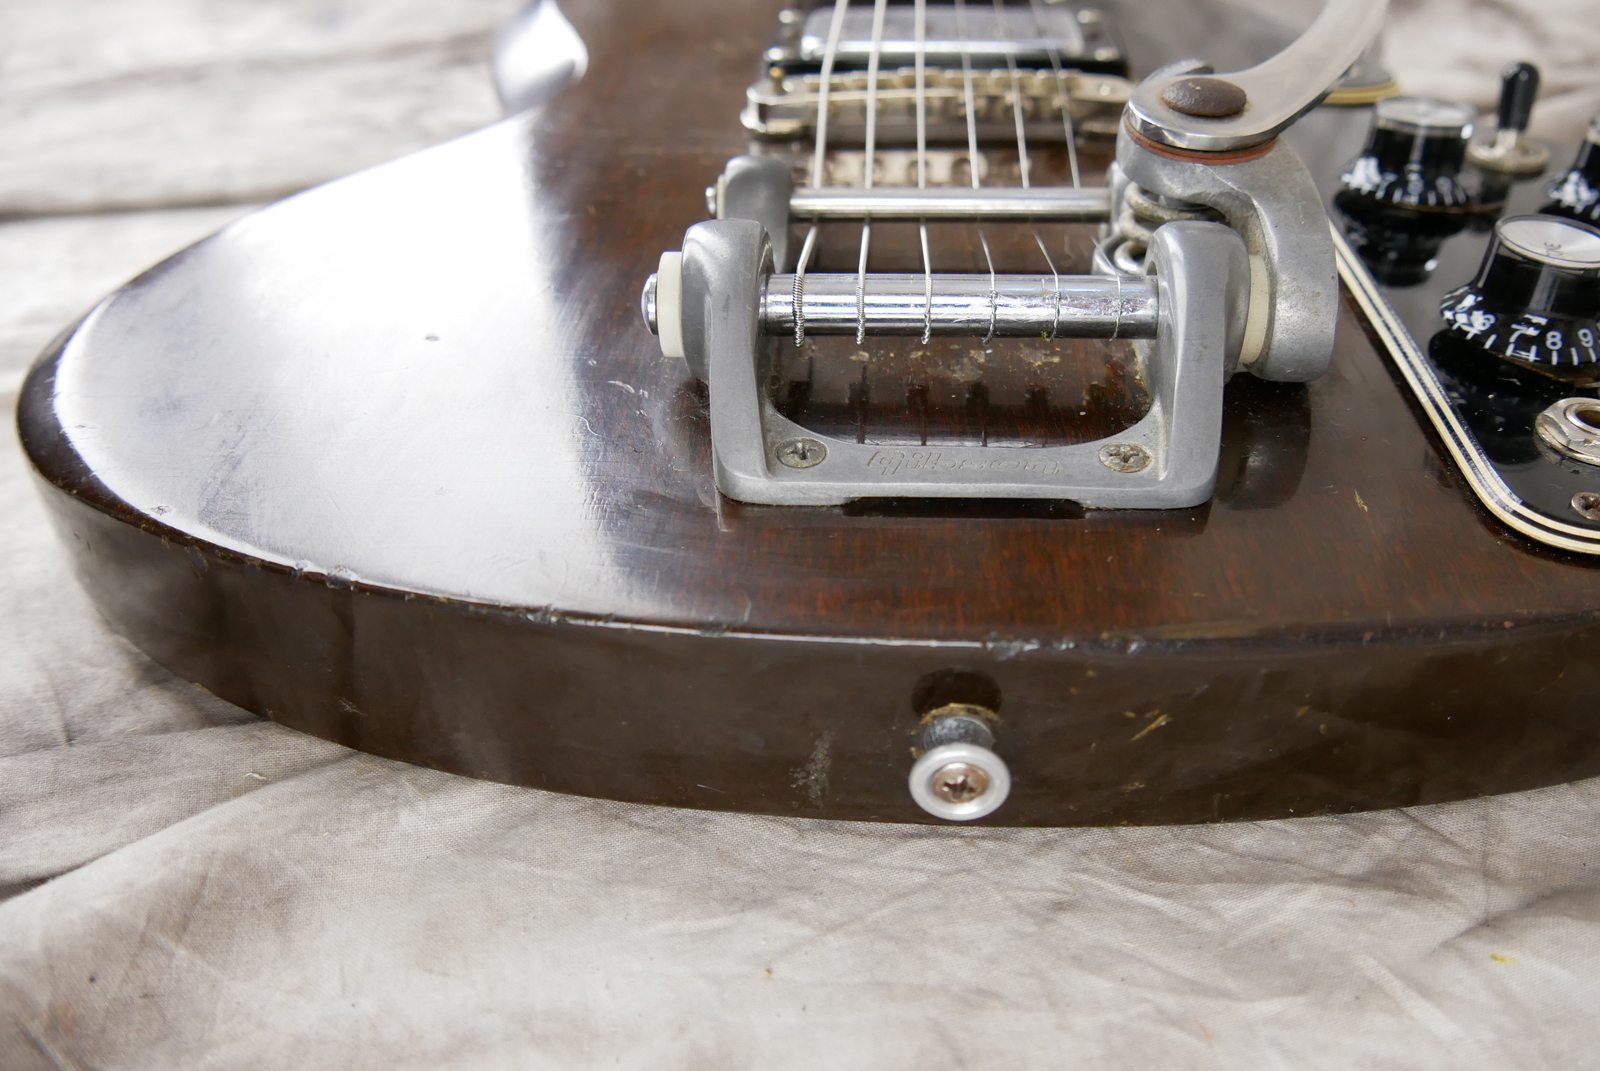 Gibson_SG_Deluxe_bigsby_1971_1972_walnut_cts-pots_1966-015.JPG